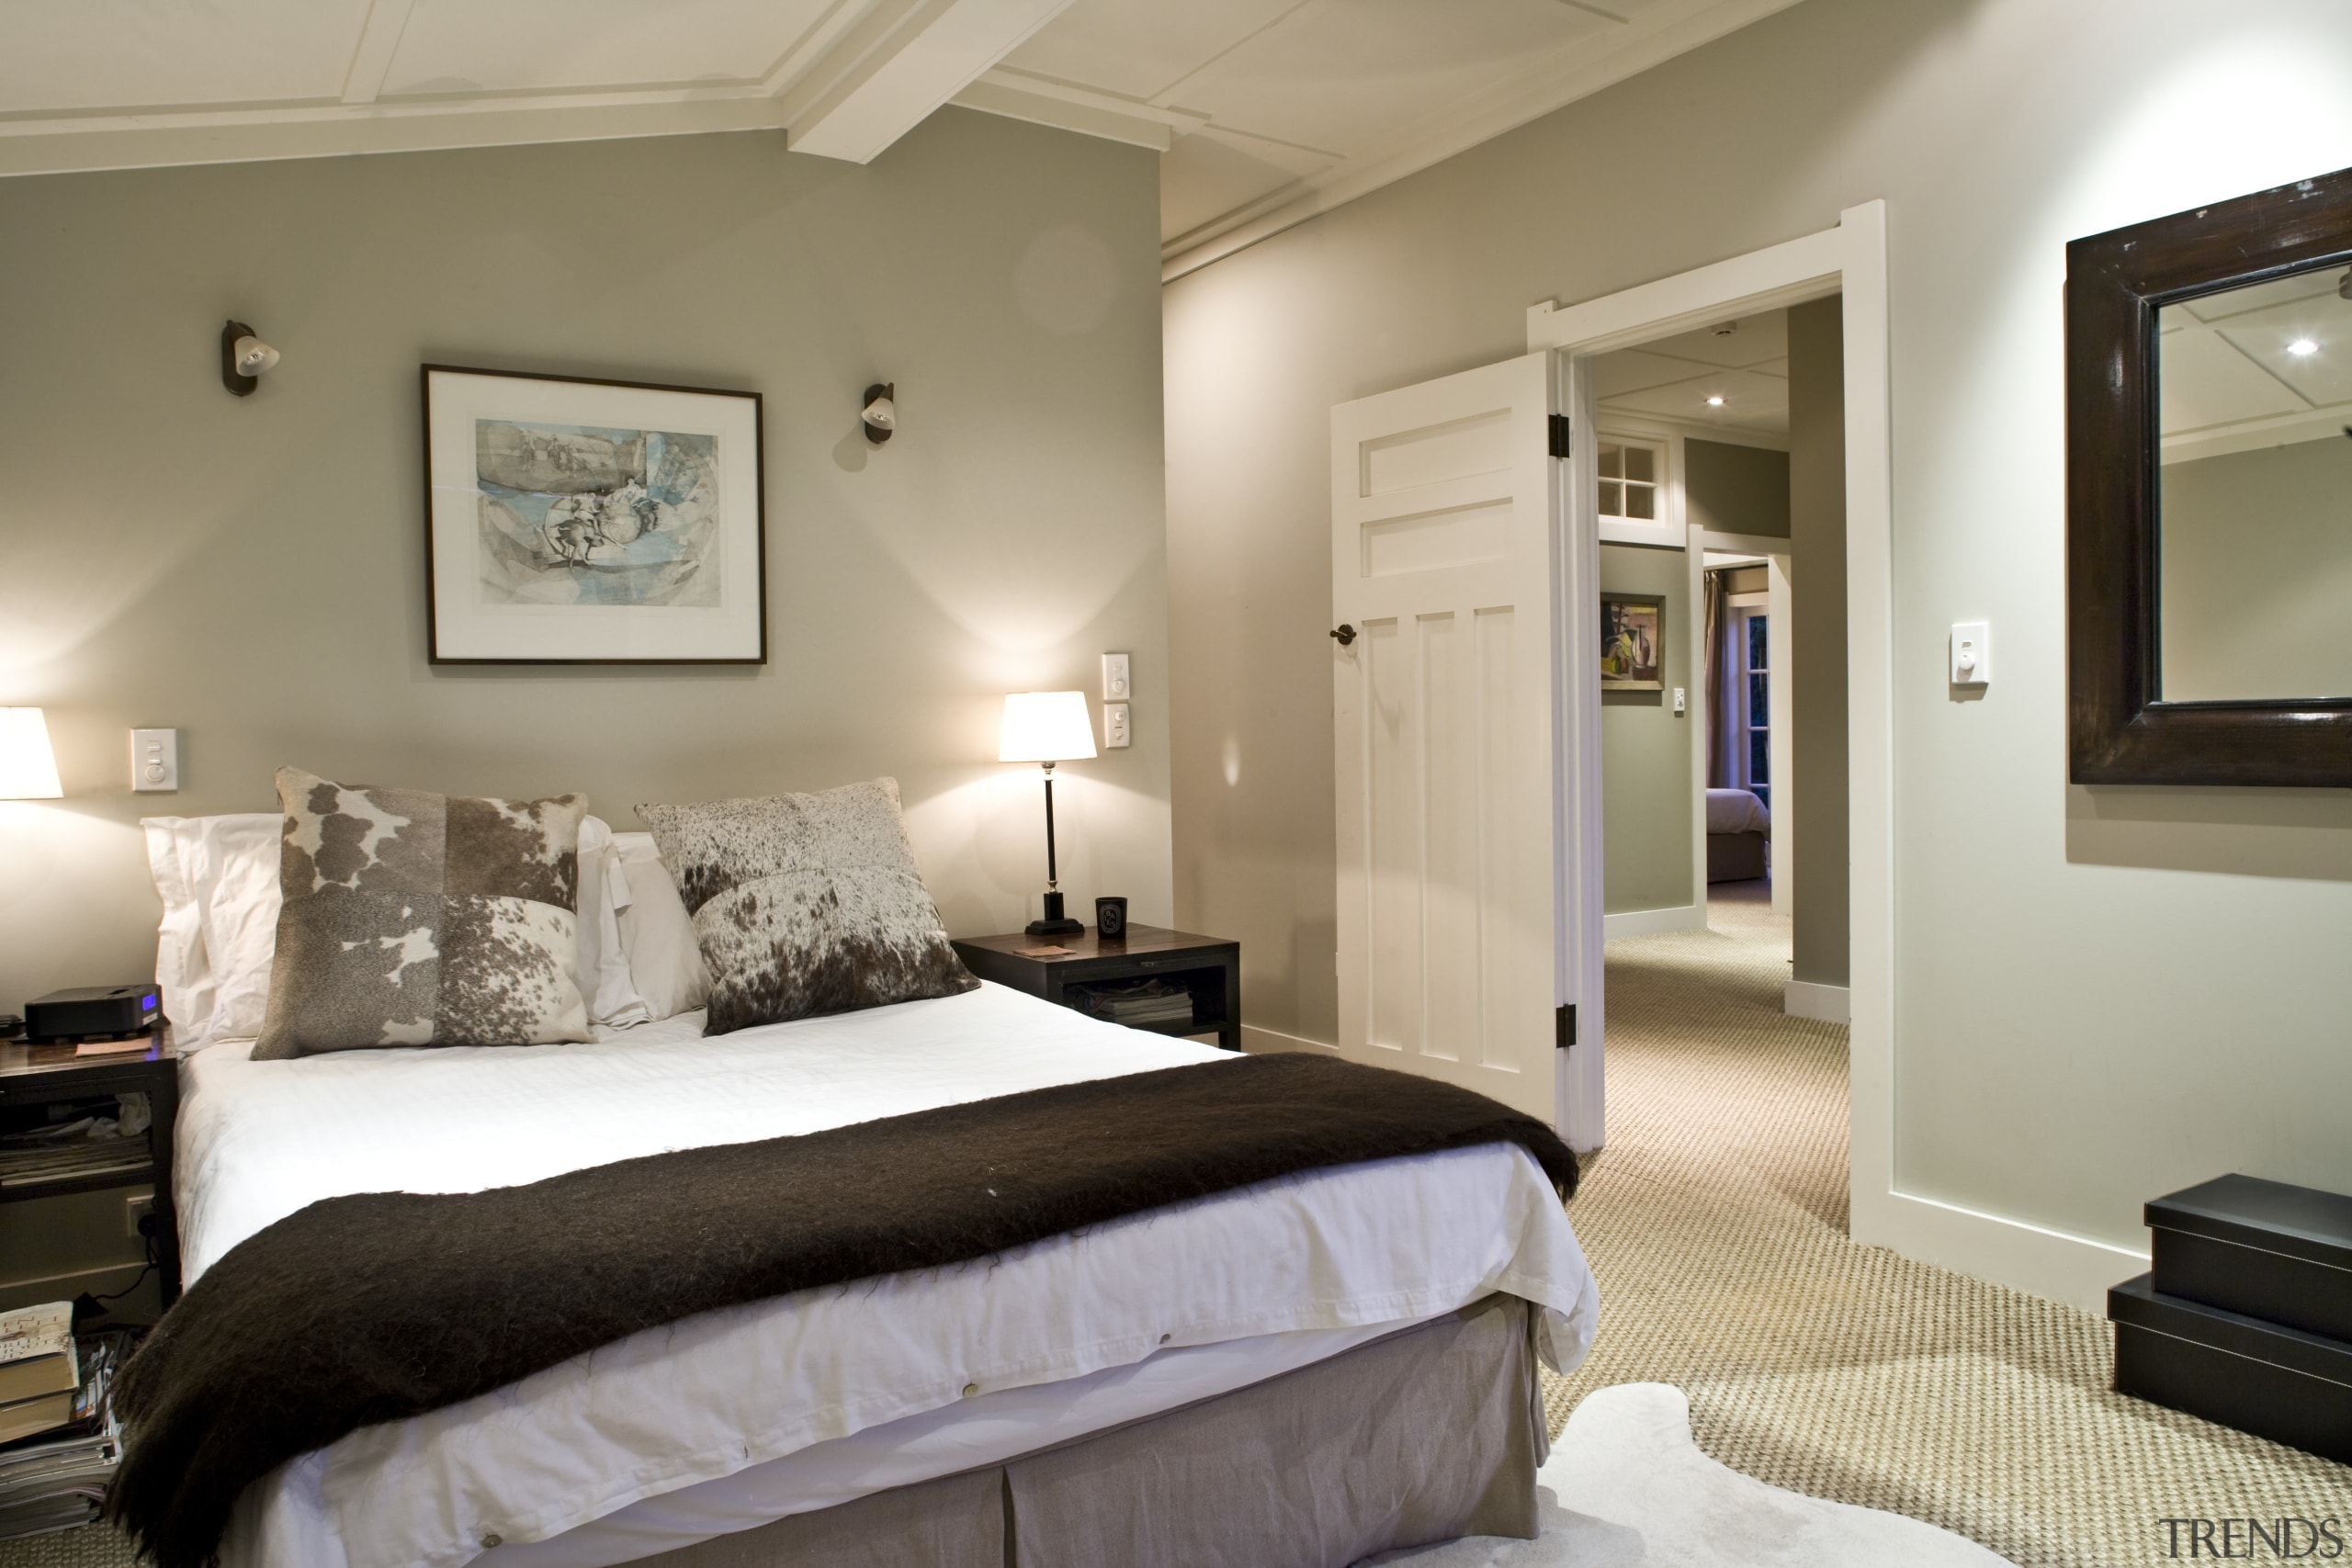 View of a bedroom, bed with white linen, bed frame, bedroom, ceiling, home, interior design, real estate, room, suite, gray